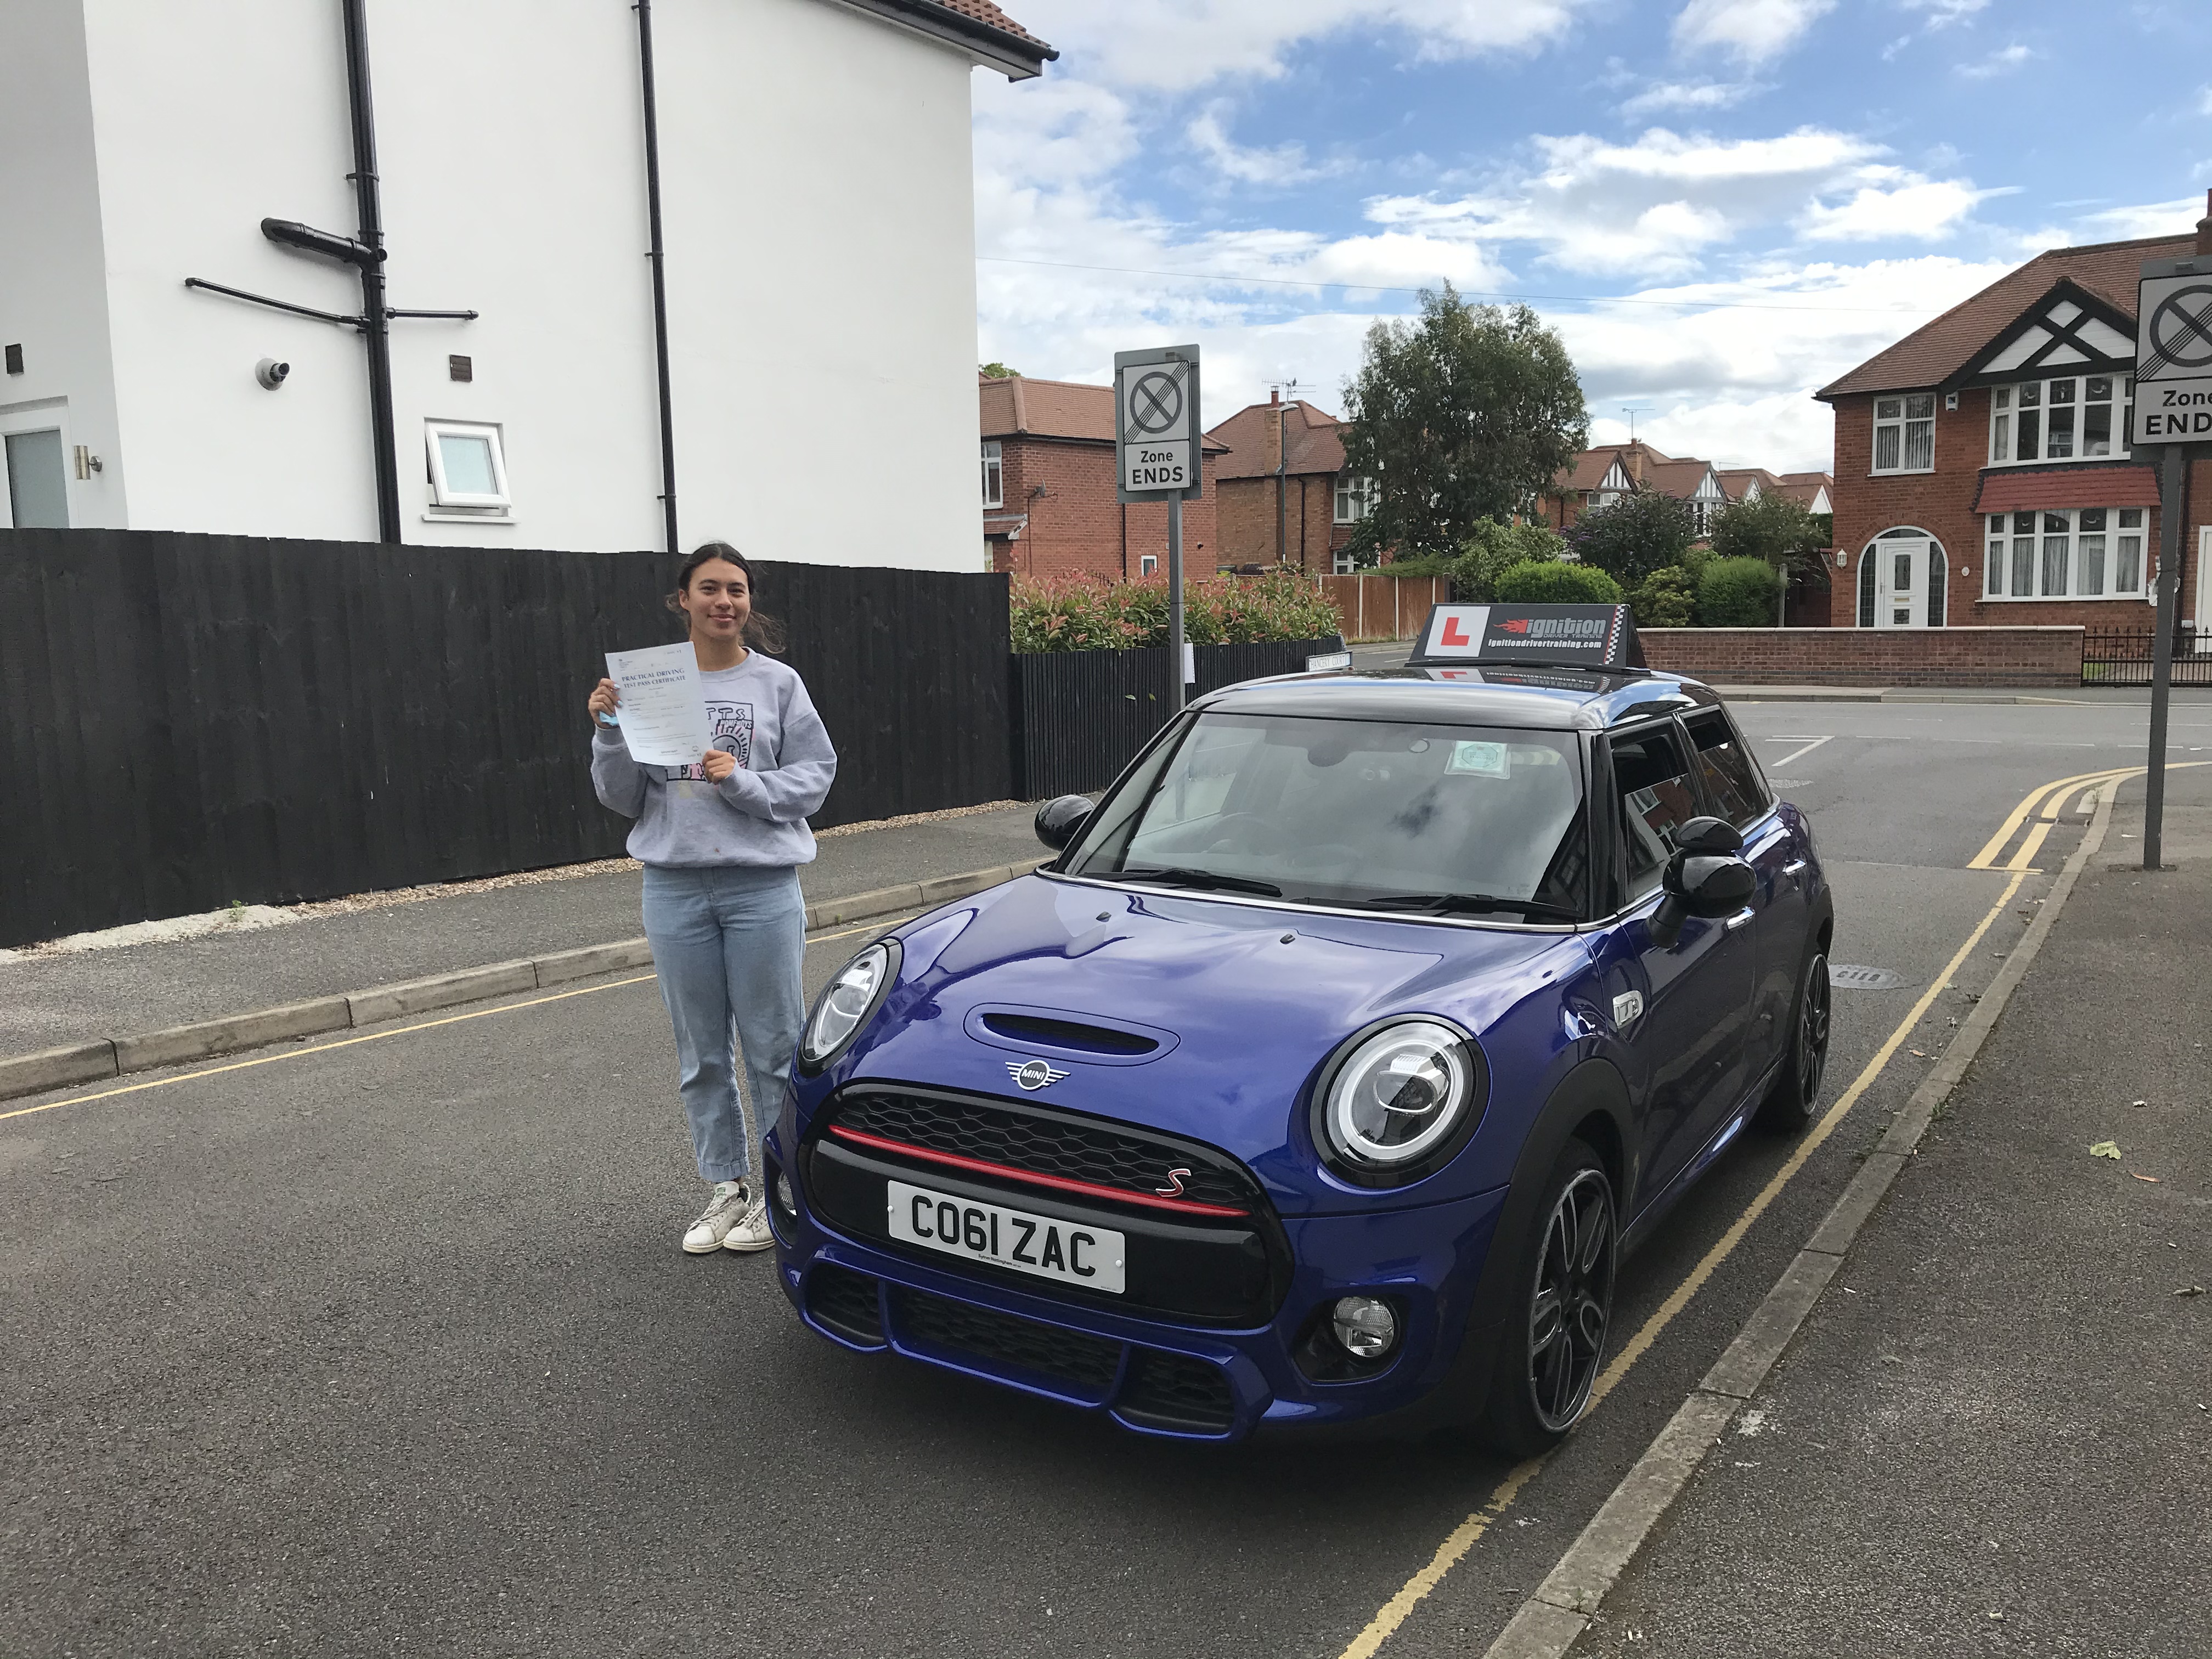 Frankie passed first time!